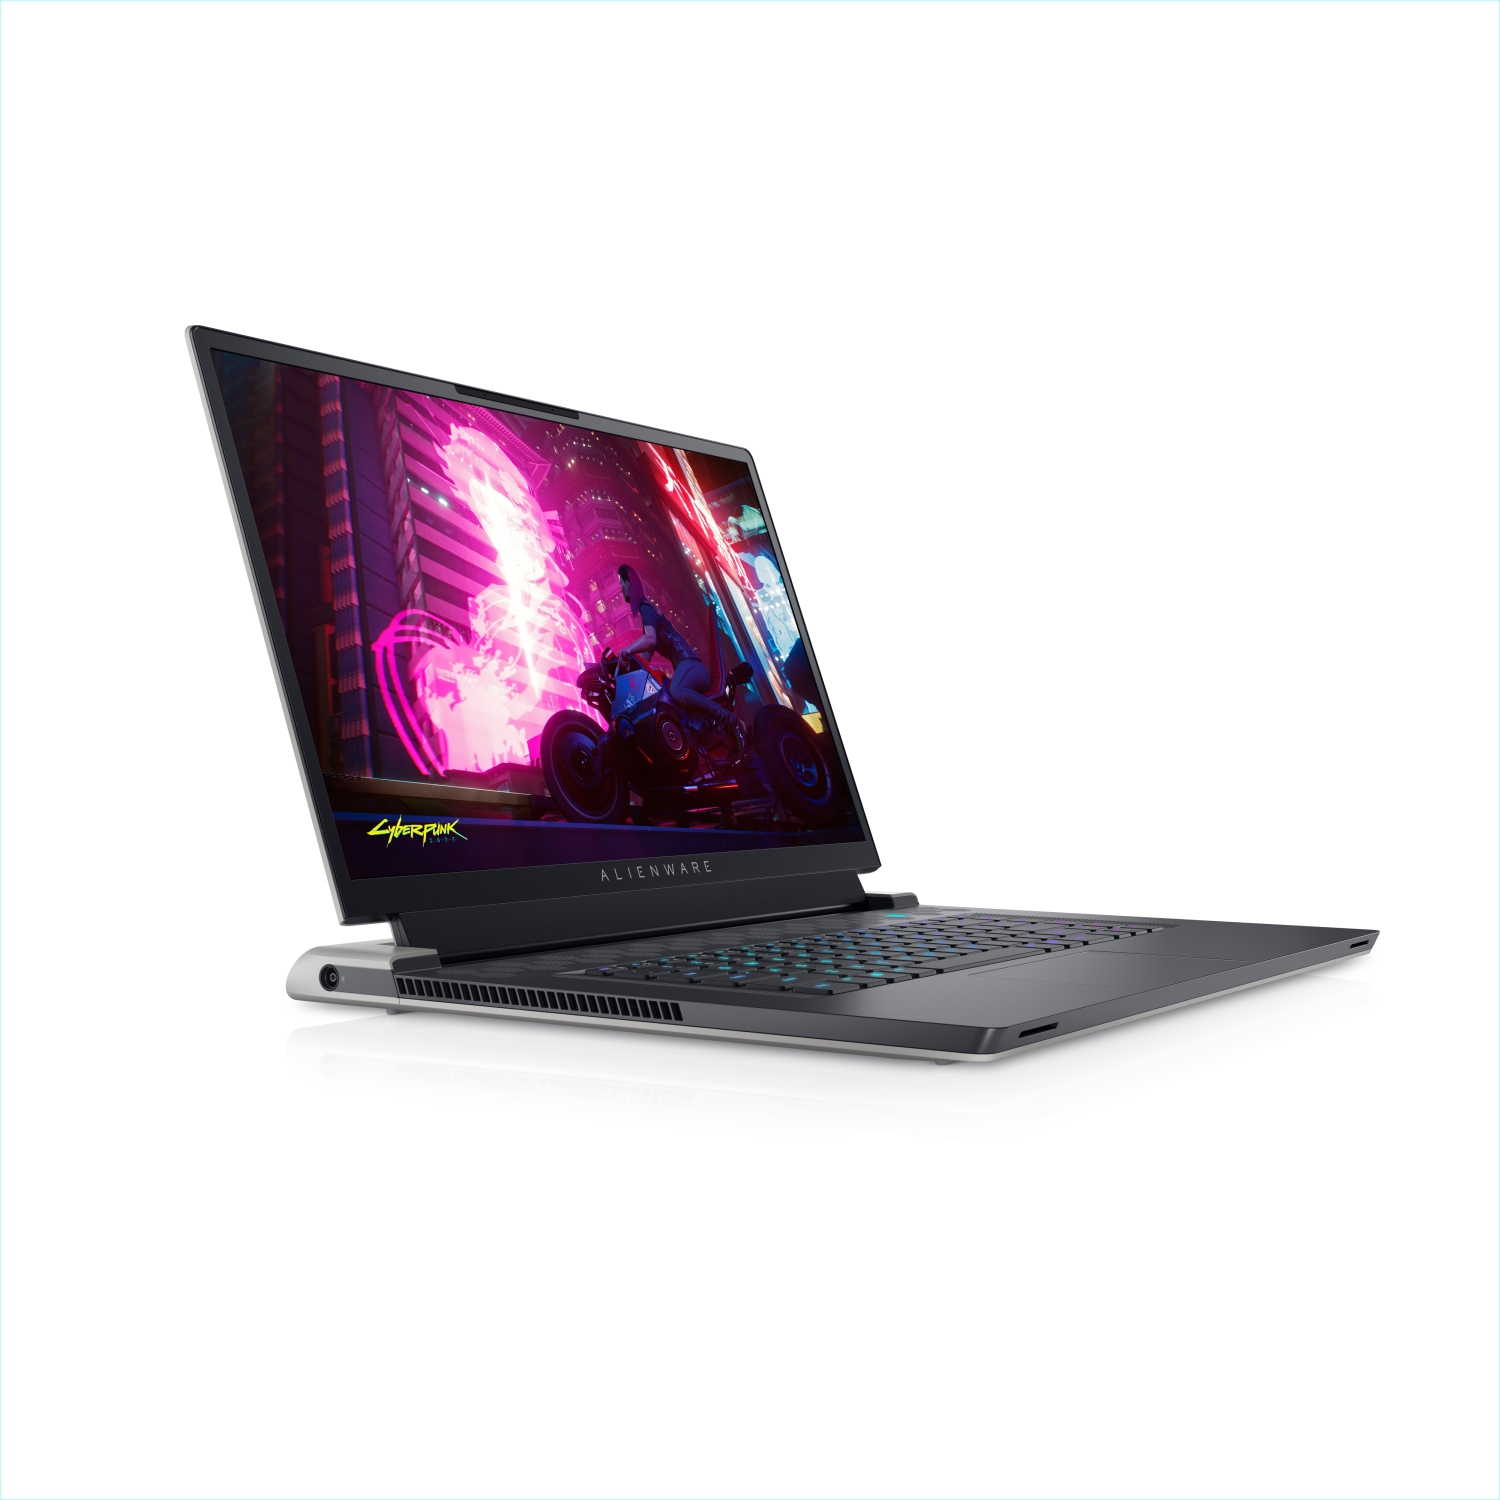 Refurbished (Excellent) - Dell Alienware X17 R1 Gaming Laptop (2021), 17.3" FHD, Core i7, 1TB SSD + 512GB SSD, 16GB RAM, RTX 3080, 4.6 GHz, 11th Gen CPU Certified